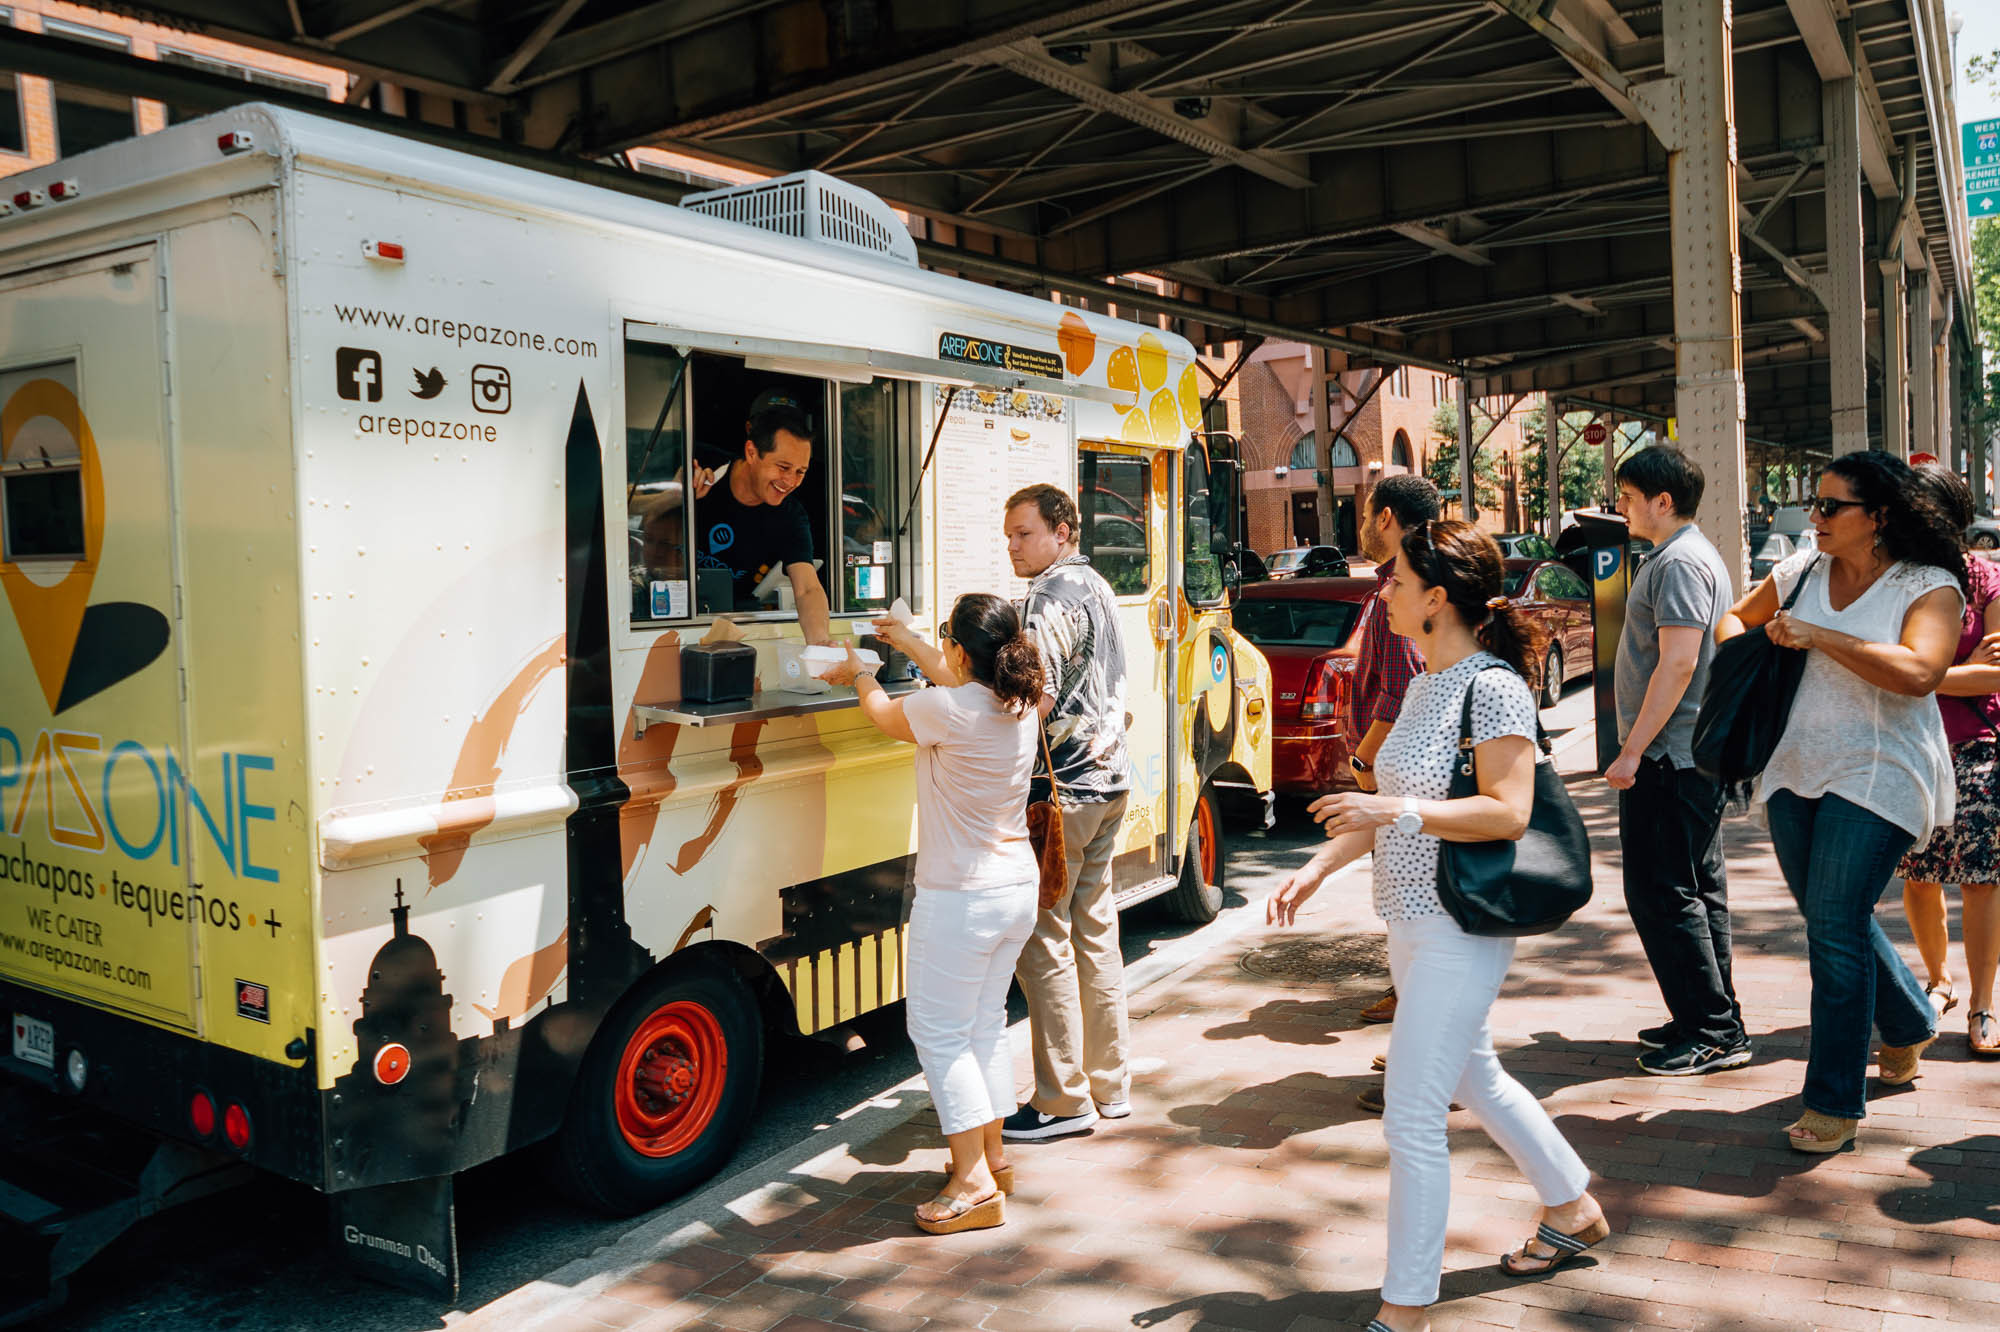 The Arepa Zone was named best food truck in Washington, D.C., two years in a row.